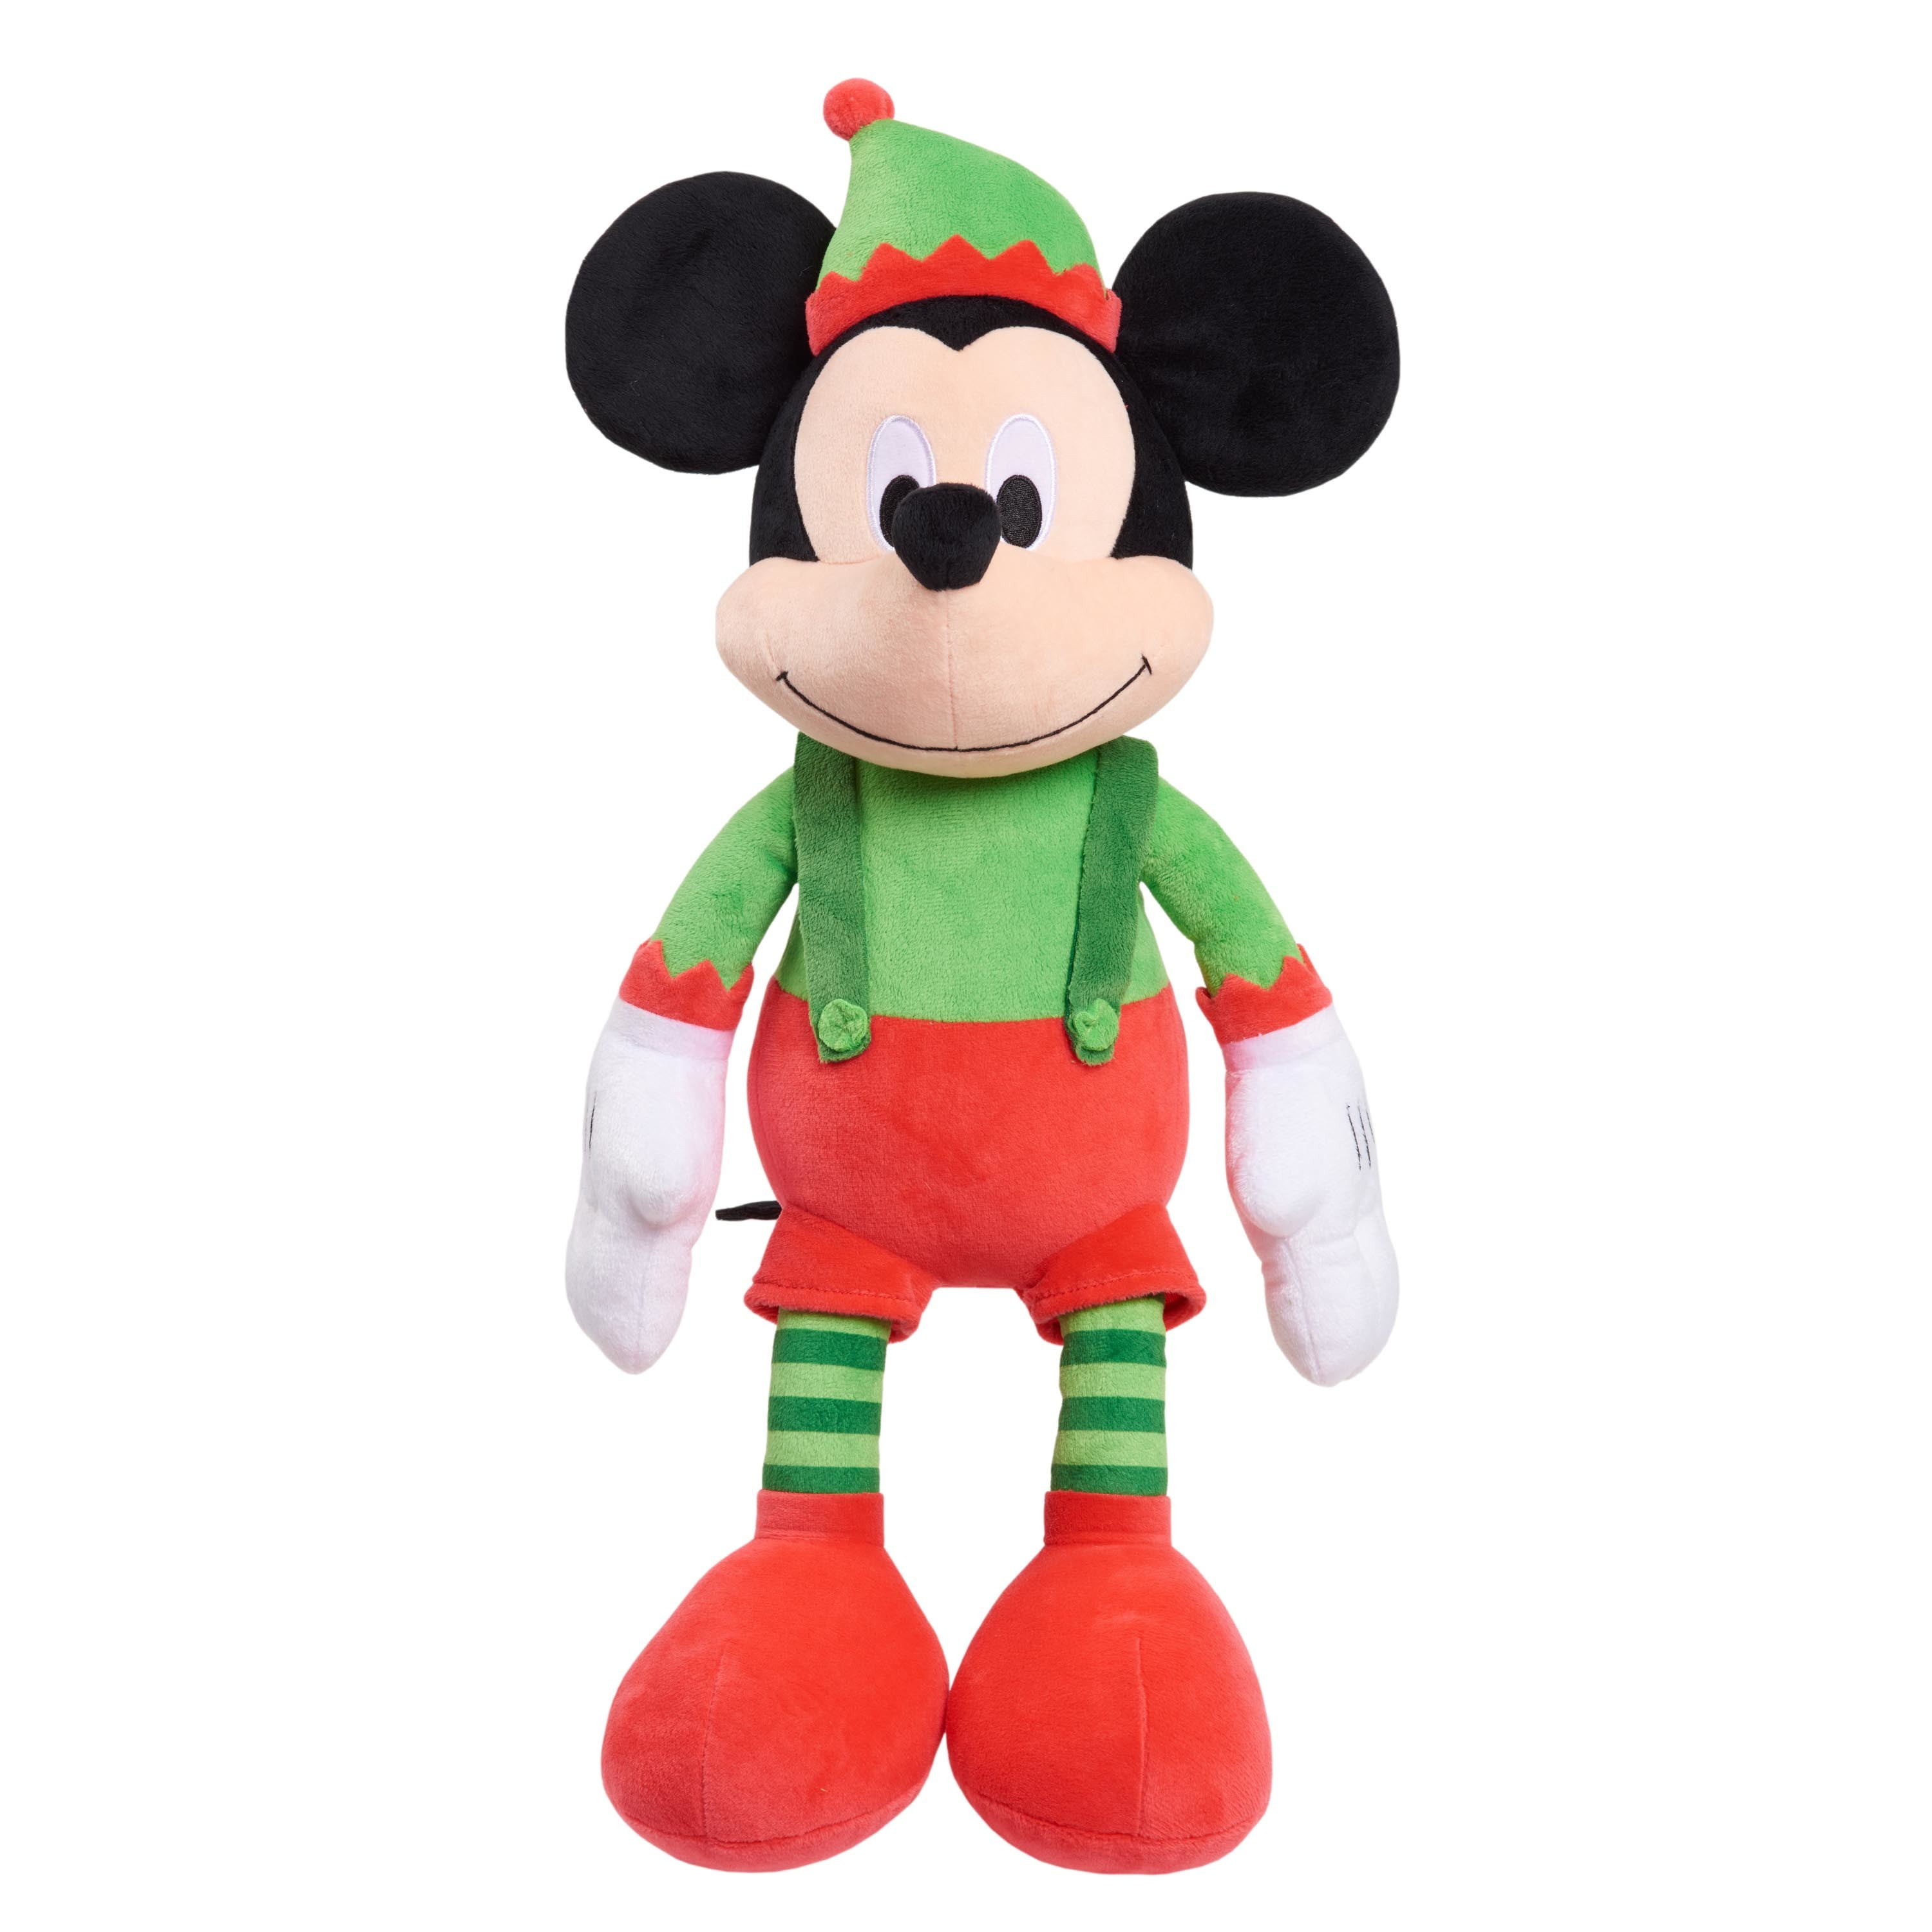 the outfit Minnie and Mickey Mouse for babies 3-4 inches 